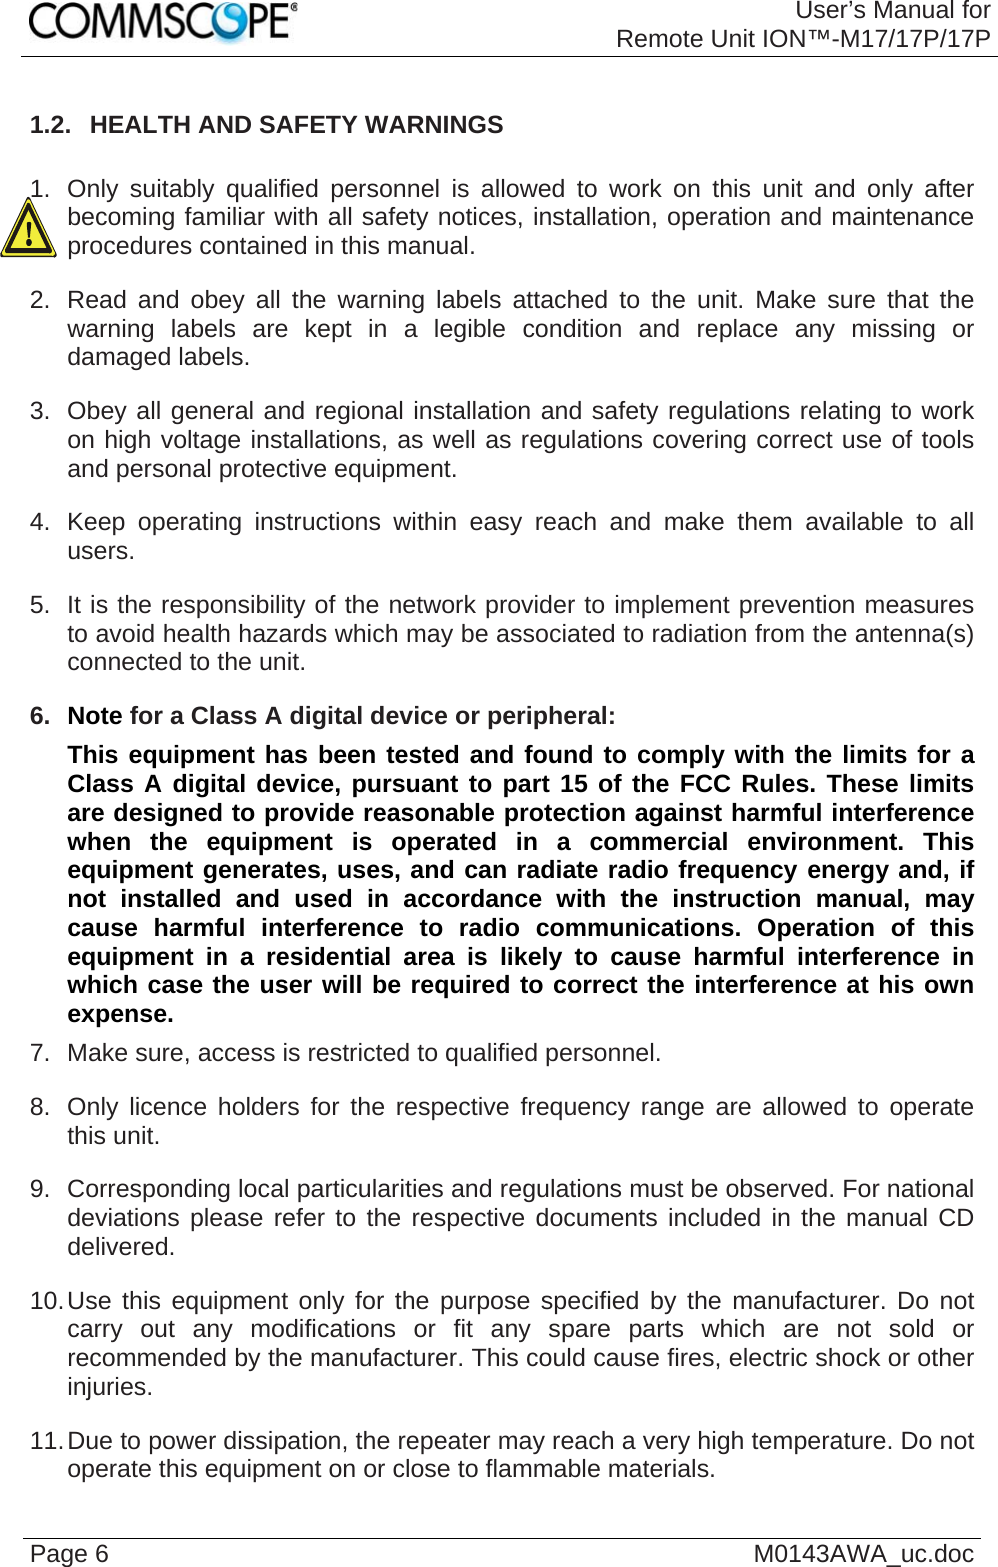 User’s Manual forRemote Unit ION™-M17/17P/17P Page 6  M0143AWA_uc.doc1.2.  HEALTH AND SAFETY WARNINGS  1.  Only suitably qualified personnel is allowed to work on this unit and only after becoming familiar with all safety notices, installation, operation and maintenance procedures contained in this manual. 2.  Read and obey all the warning labels attached to the unit. Make sure that the warning labels are kept in a legible condition and replace any missing or damaged labels. 3.  Obey all general and regional installation and safety regulations relating to work on high voltage installations, as well as regulations covering correct use of tools and personal protective equipment. 4.  Keep operating instructions within easy reach and make them available to all users. 5.  It is the responsibility of the network provider to implement prevention measures to avoid health hazards which may be associated to radiation from the antenna(s) connected to the unit. 6.  Note for a Class A digital device or peripheral: This equipment has been tested and found to comply with the limits for a Class A digital device, pursuant to part 15 of the FCC Rules. These limits are designed to provide reasonable protection against harmful interference when the equipment is operated in a commercial environment. This equipment generates, uses, and can radiate radio frequency energy and, if not installed and used in accordance with the instruction manual, may cause harmful interference to radio communications. Operation of this equipment in a residential area is likely to cause harmful interference in which case the user will be required to correct the interference at his own expense. 7.  Make sure, access is restricted to qualified personnel. 8.  Only licence holders for the respective frequency range are allowed to operate this unit. 9.  Corresponding local particularities and regulations must be observed. For national deviations please refer to the respective documents included in the manual CD delivered. 10. Use this equipment only for the purpose specified by the manufacturer. Do not carry out any modifications or fit any spare parts which are not sold or recommended by the manufacturer. This could cause fires, electric shock or other injuries. 11. Due to power dissipation, the repeater may reach a very high temperature. Do not operate this equipment on or close to flammable materials.  